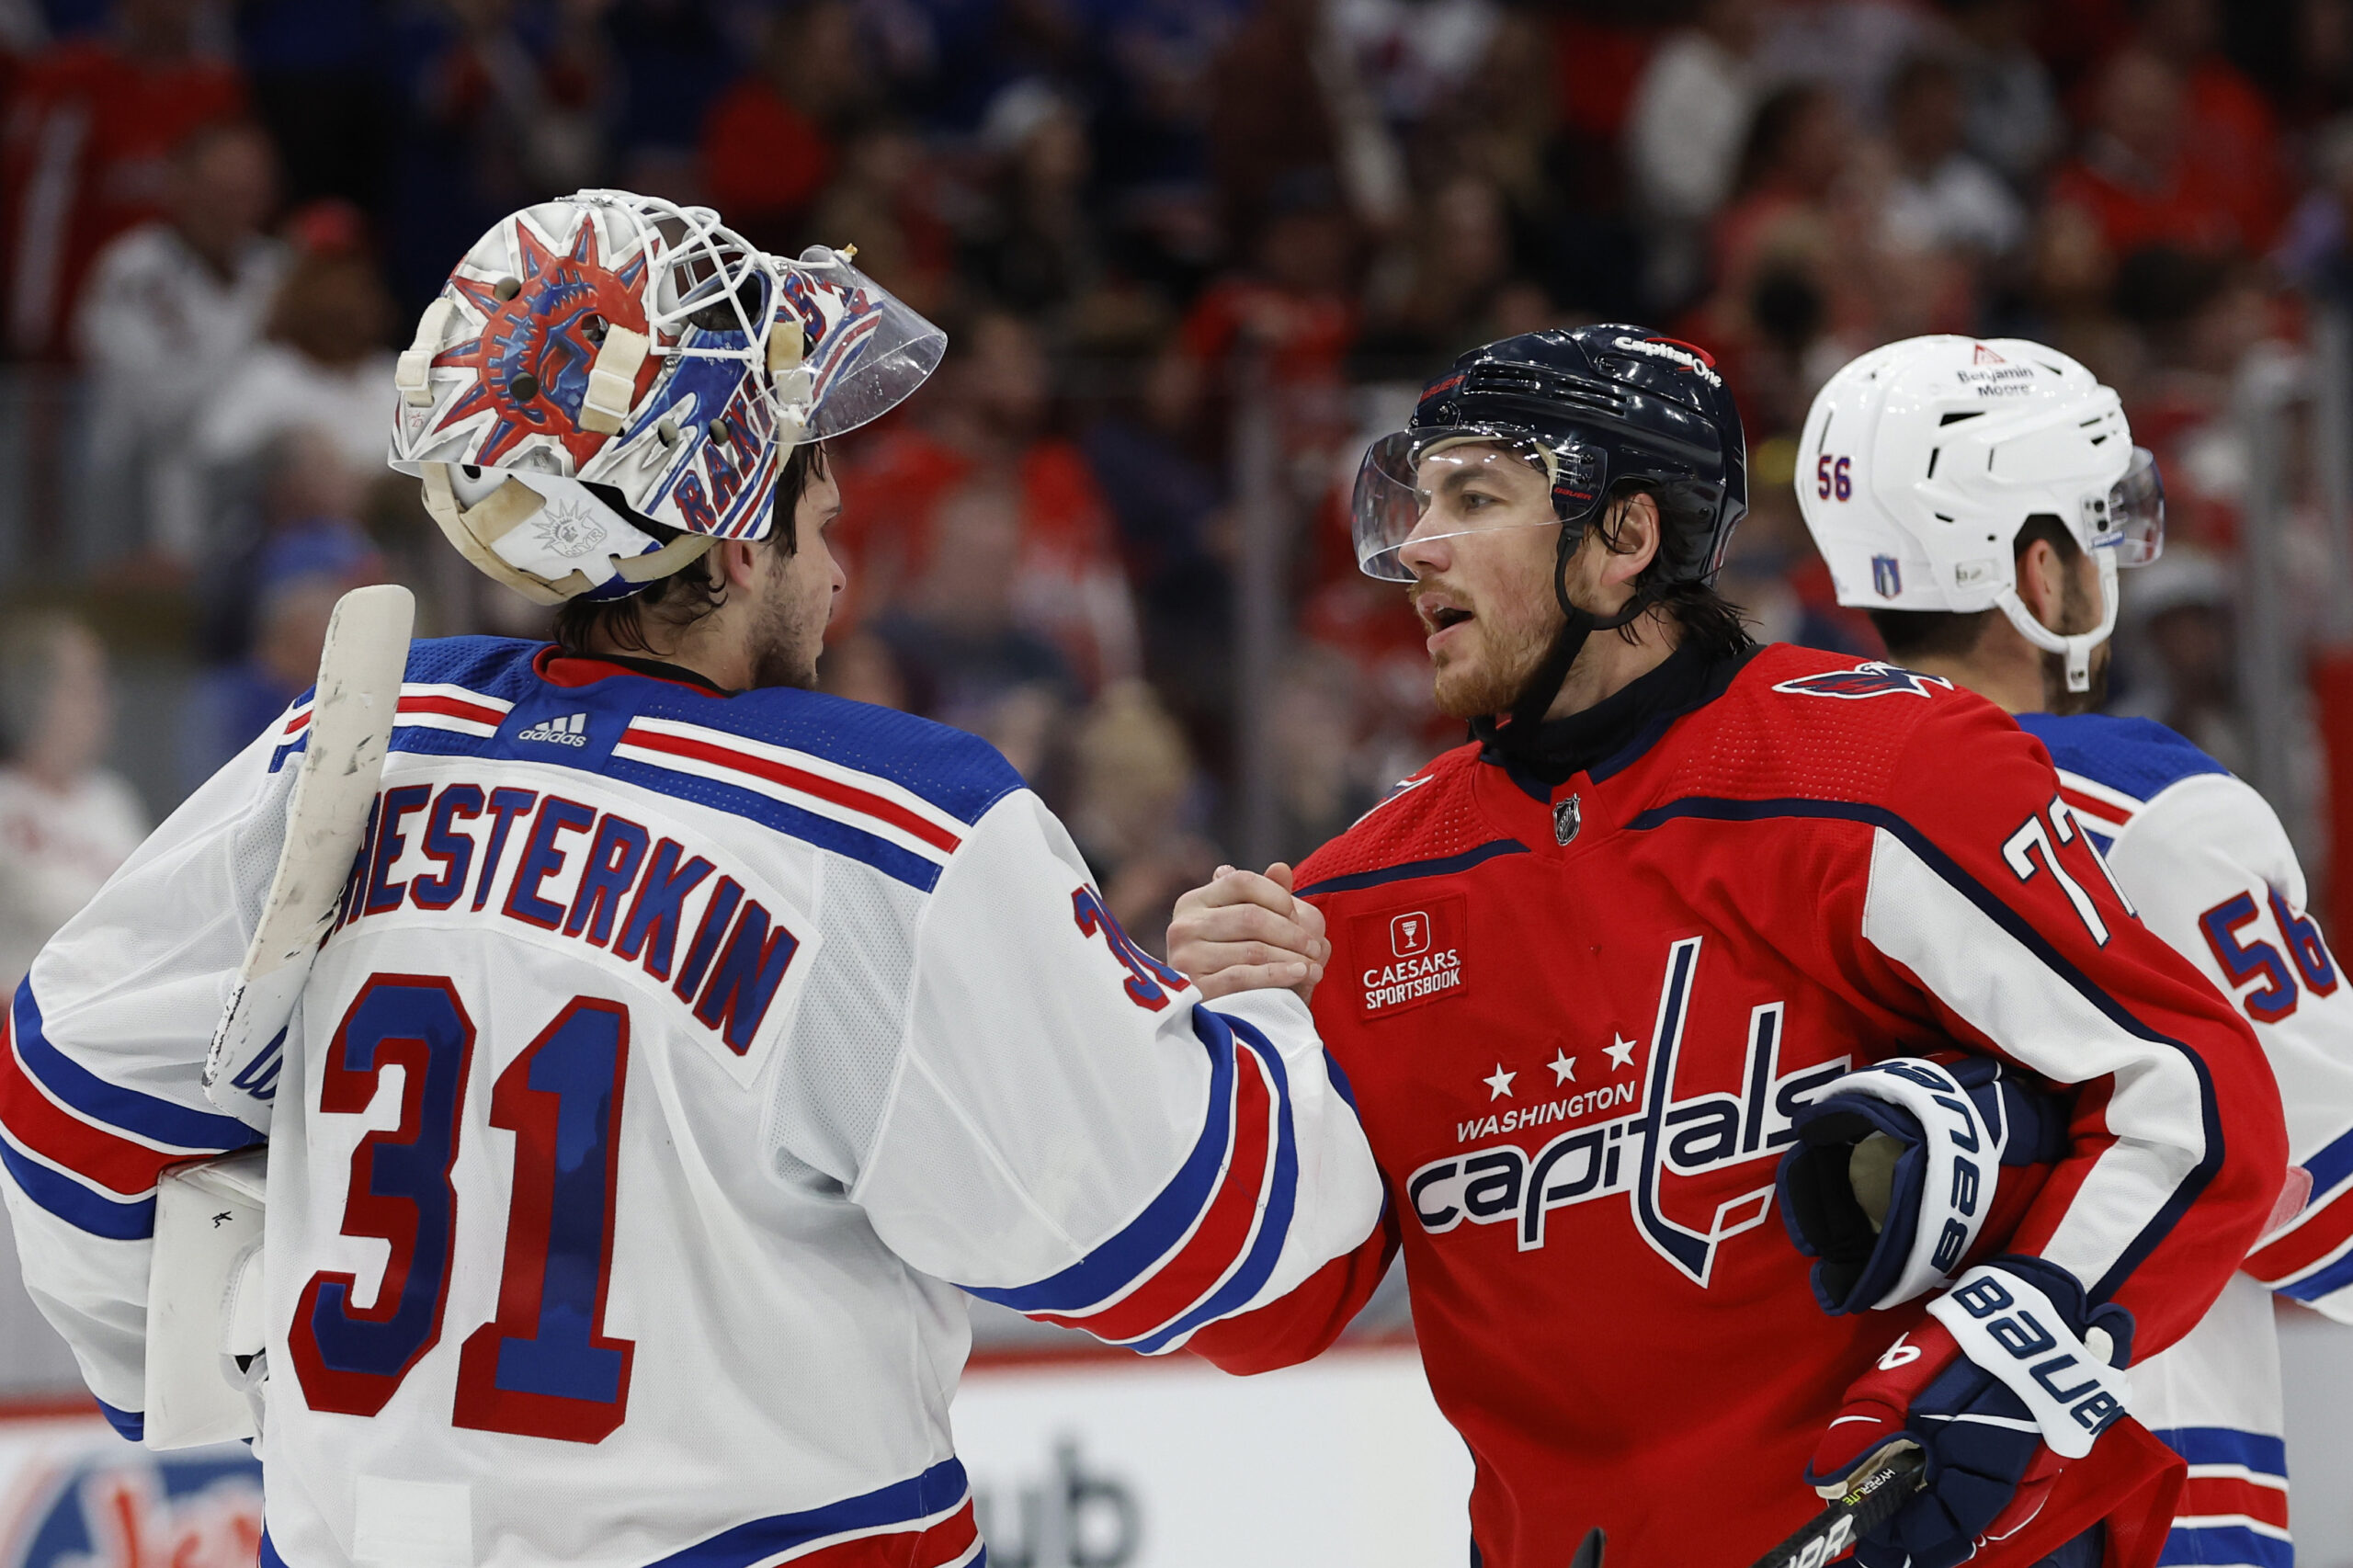 Washington Capitals Weekly Update: April 23 to April 29